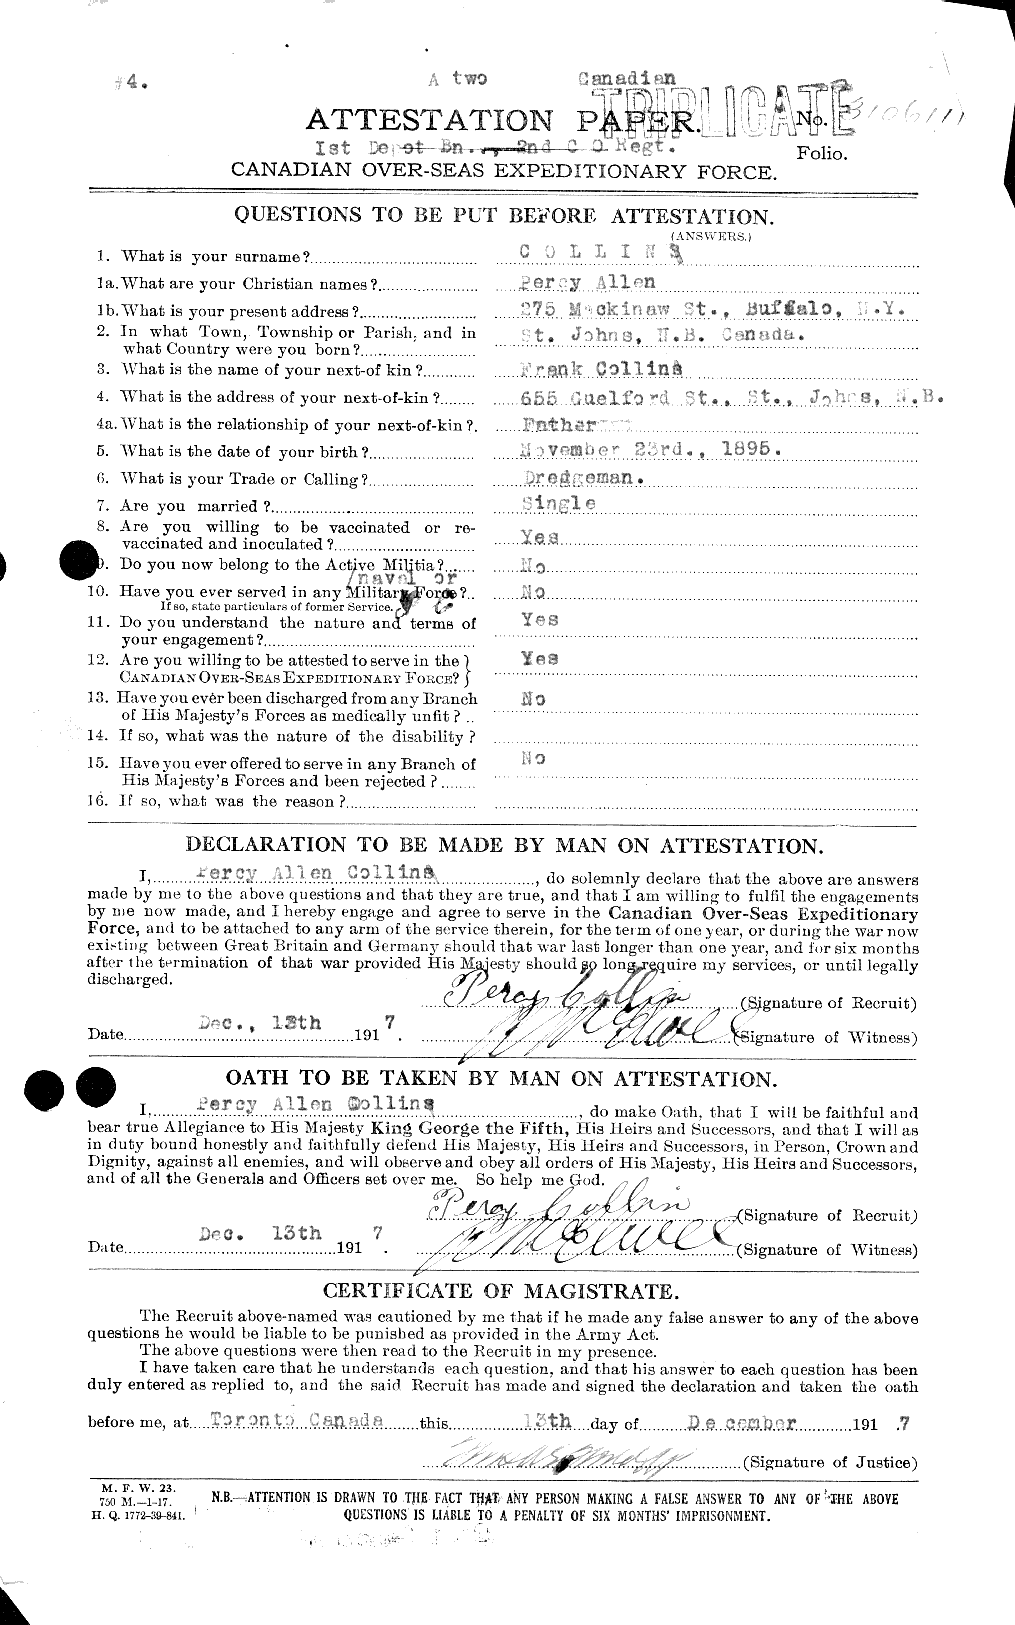 Personnel Records of the First World War - CEF 034490a